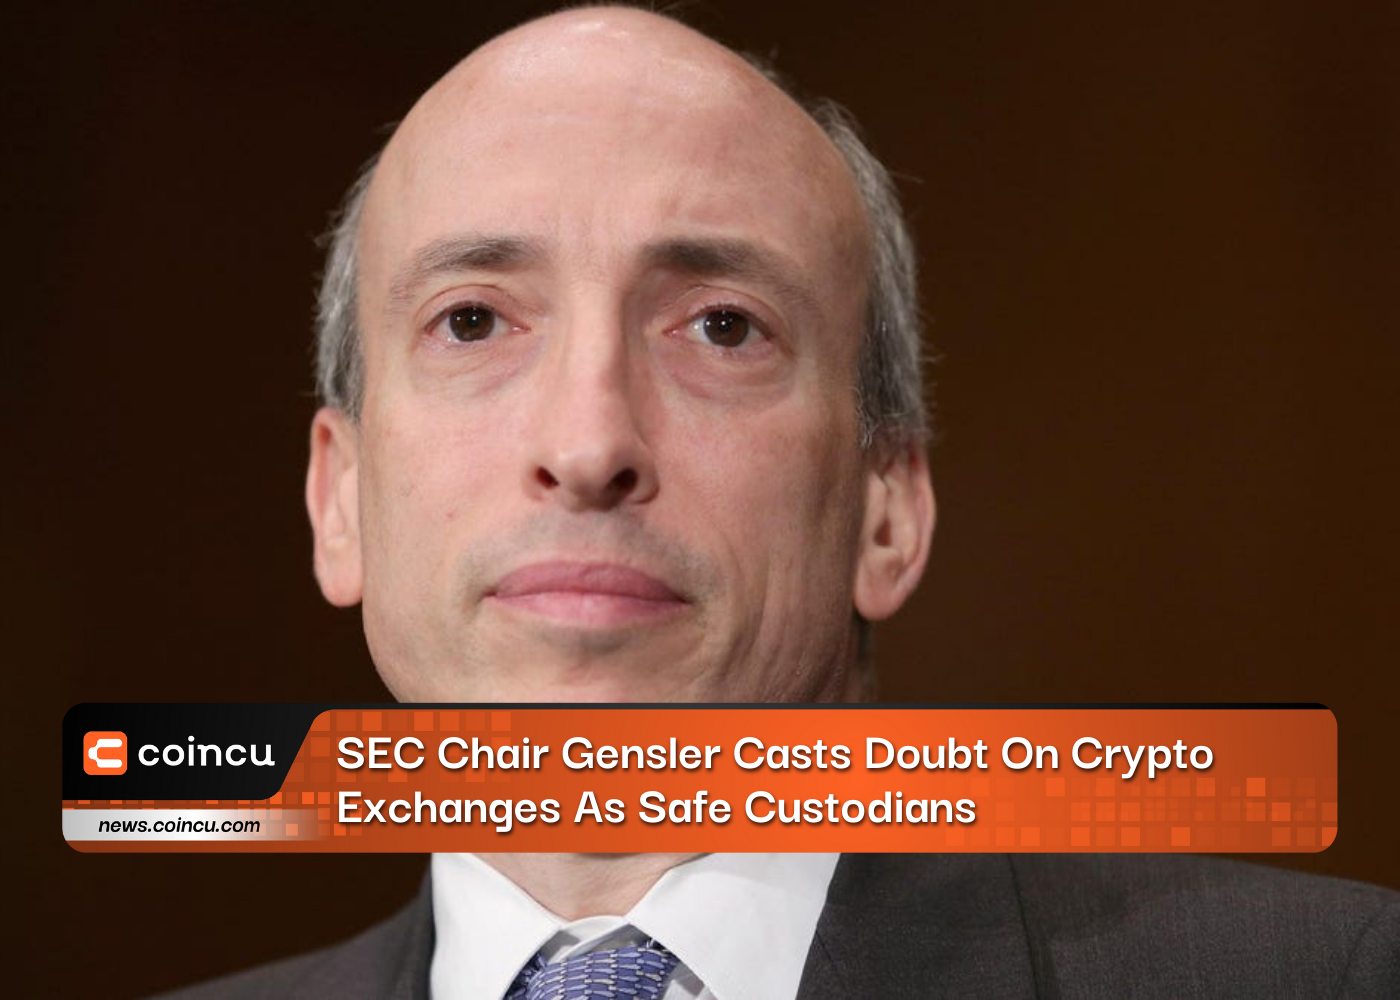 SEC Chair Gensler Casts Doubt On Crypto Exchanges As Safe Custodians